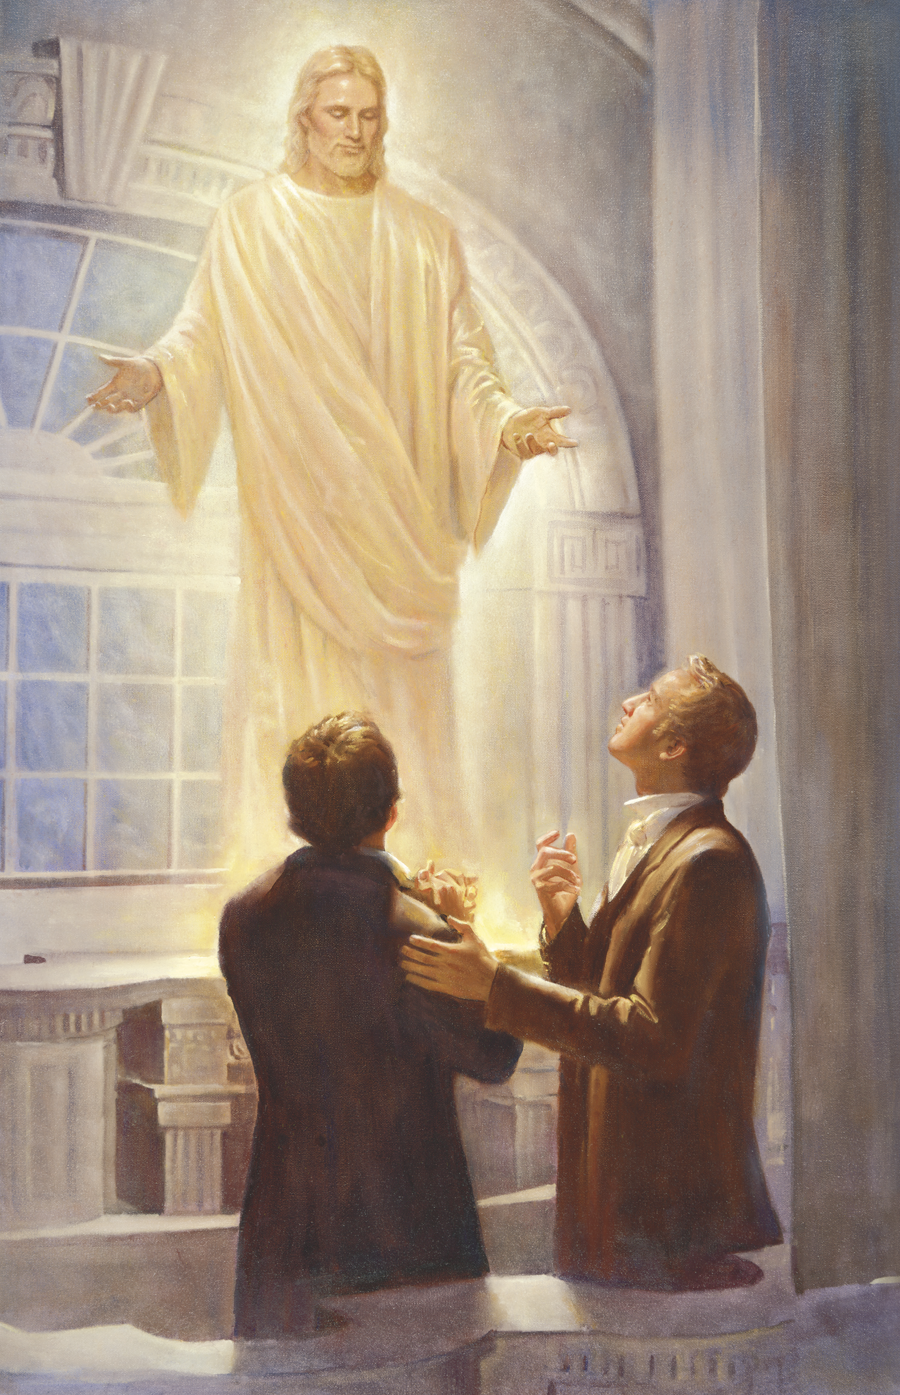 The Lord Appears in the Kirtland Temple